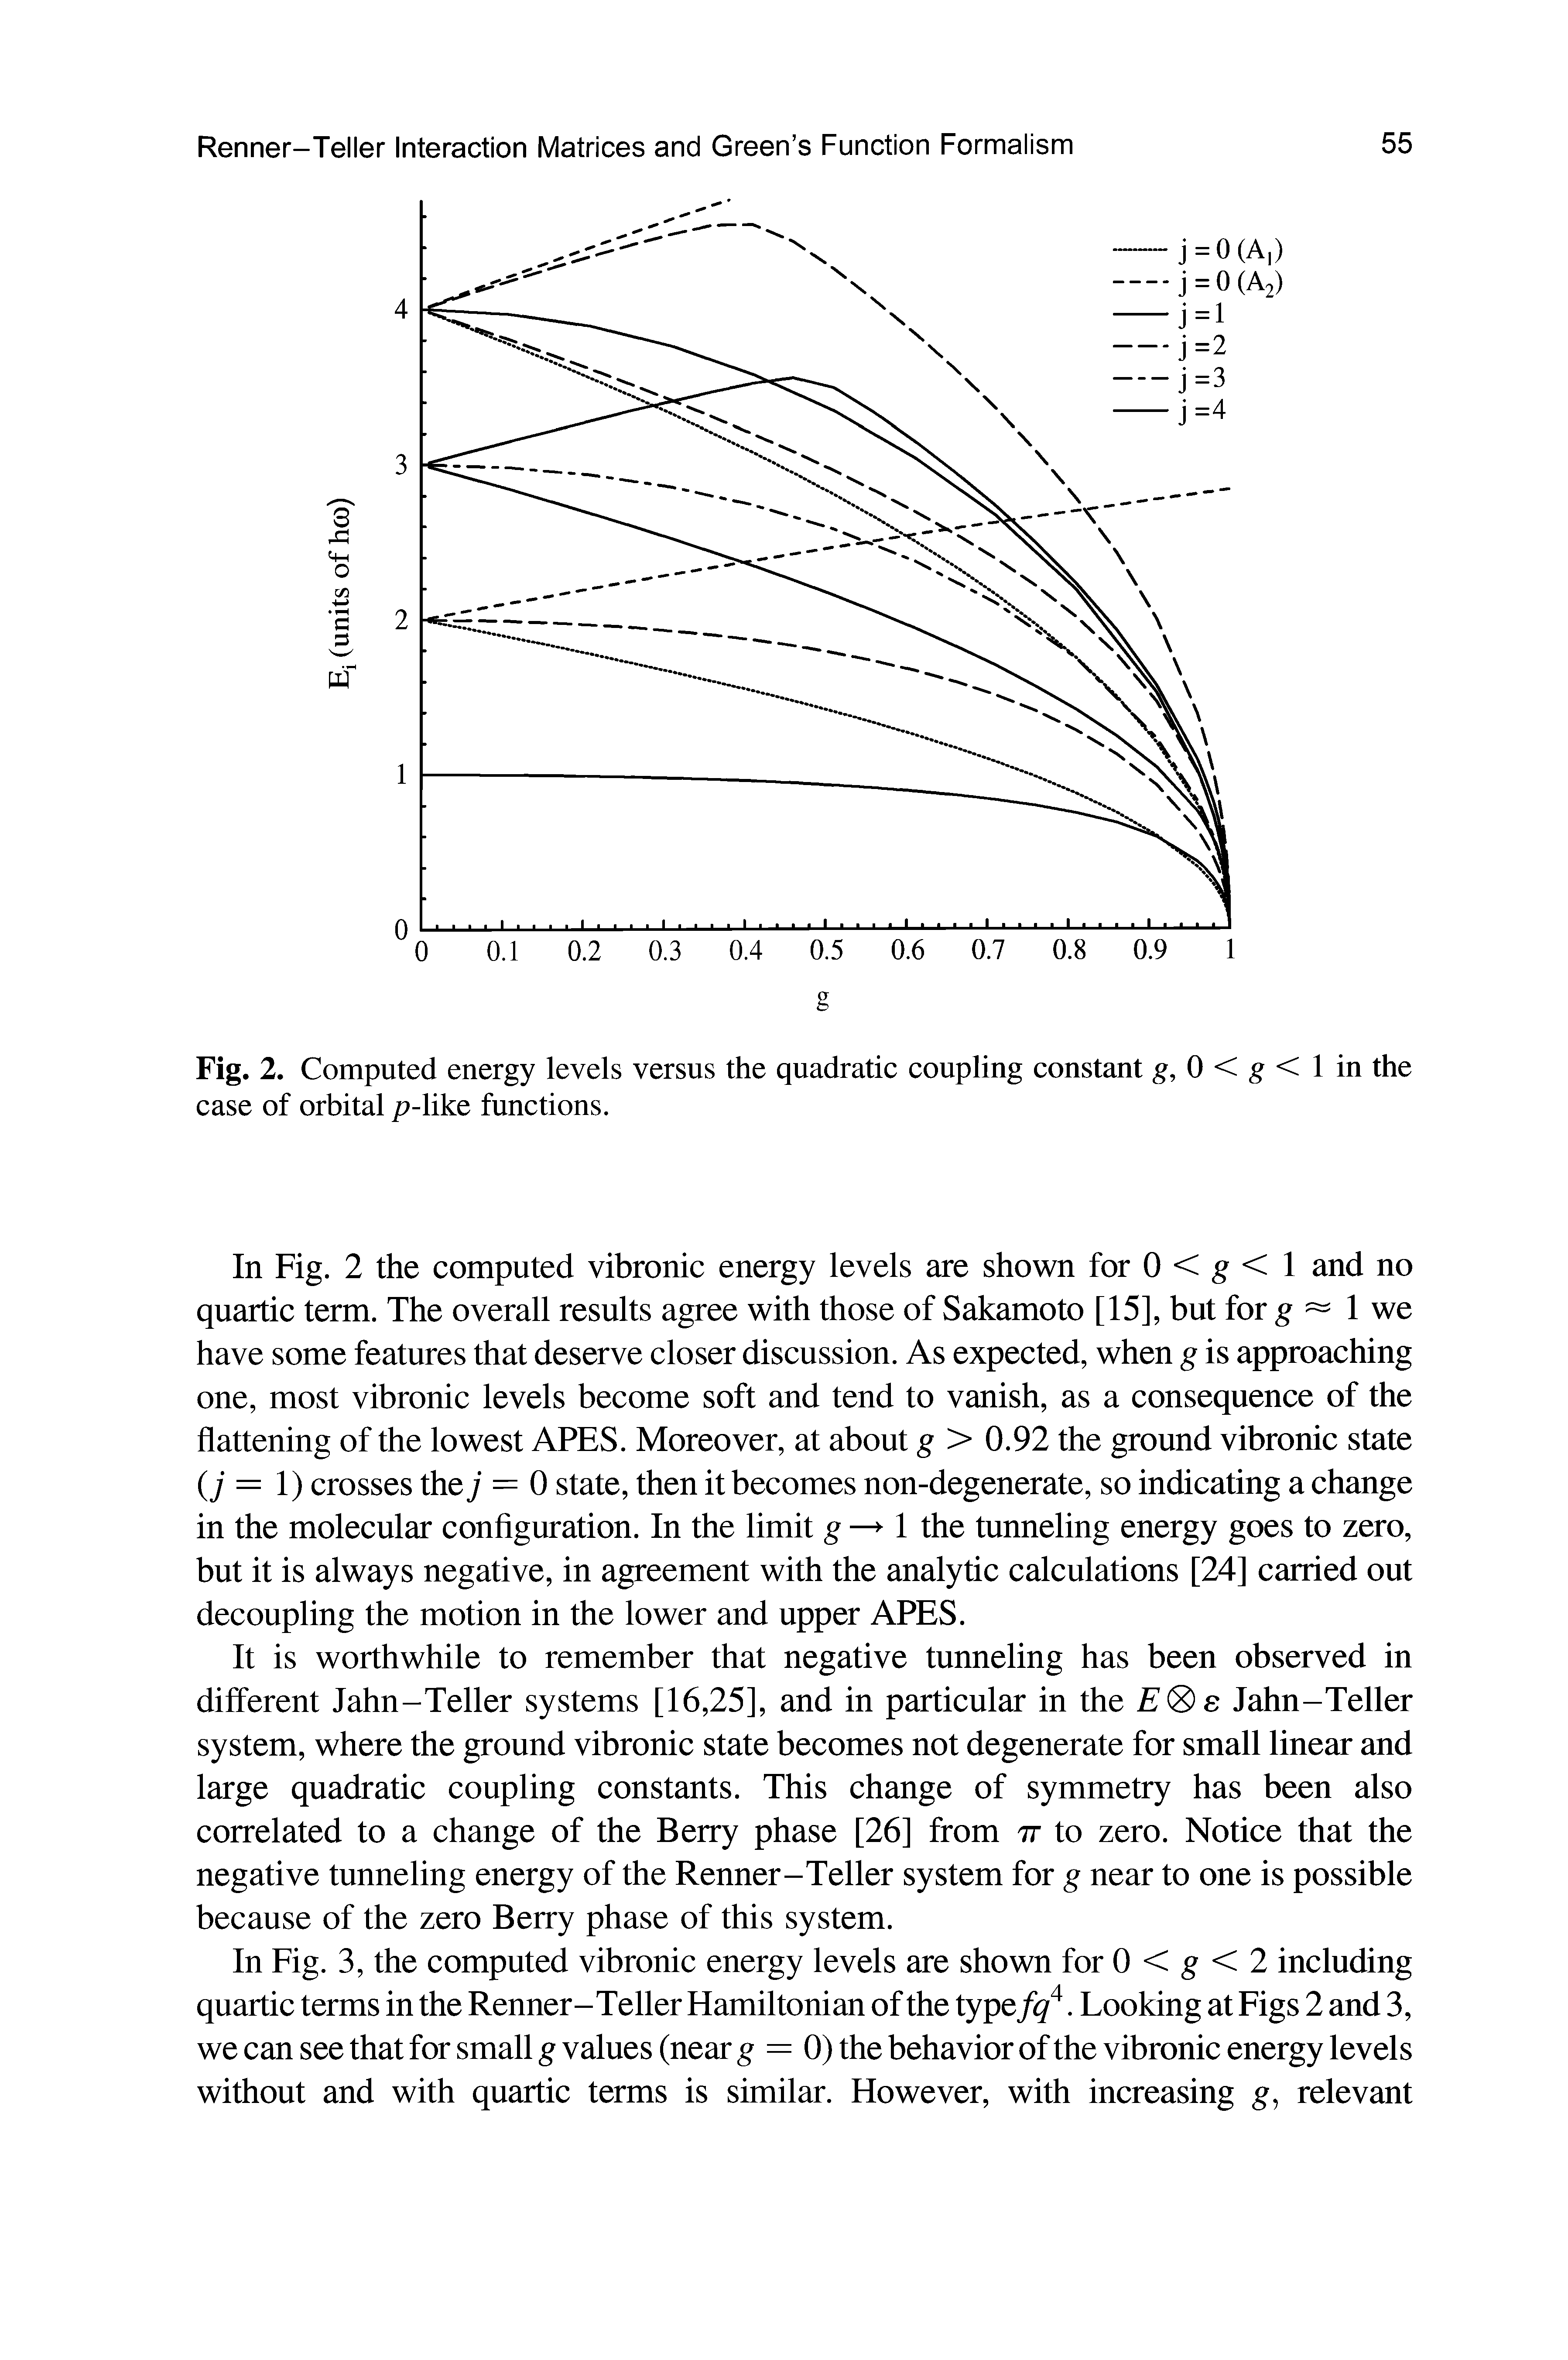 Fig. 2. Computed energy levels versus the quadratic coupling constant g, 0 < g < 1 in the case of orbital p-like functions.